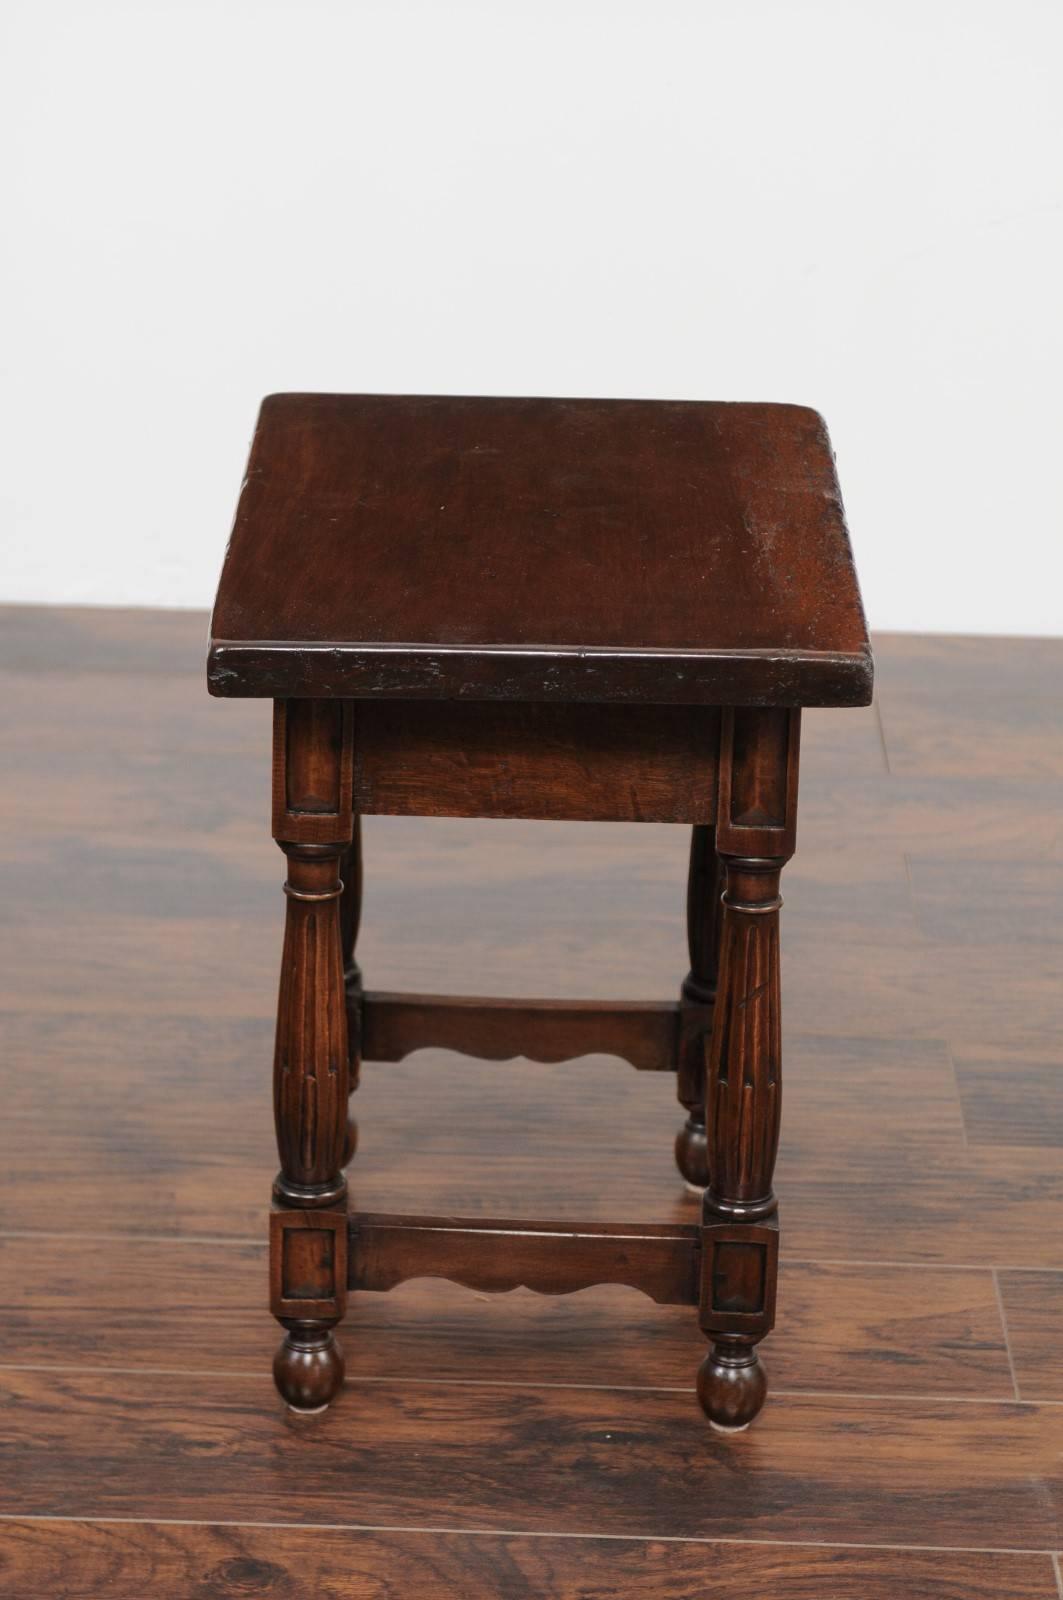 Petite Italian Walnut Side Table with Single Drawer and Fluted Legs, circa 1870 For Sale 4